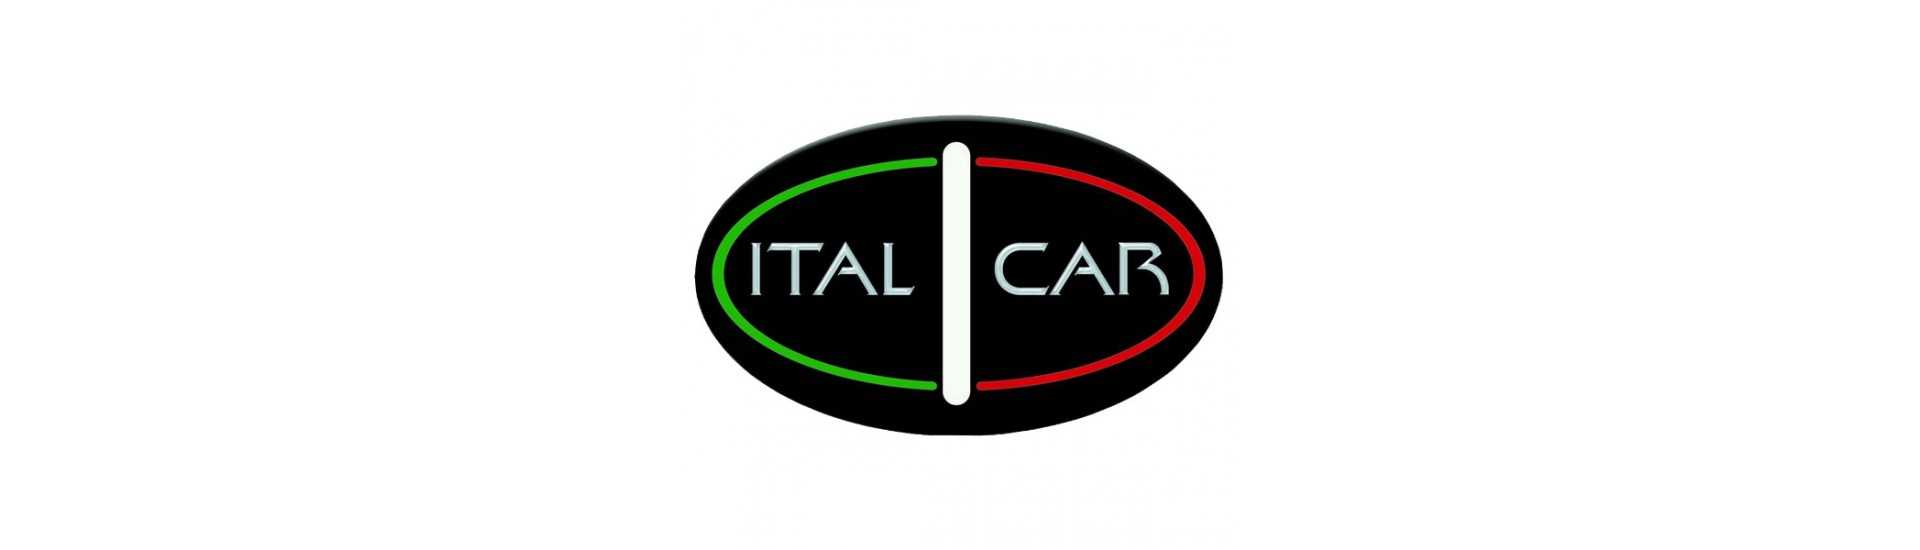 Silent engine block at best price for car without permit Italcar